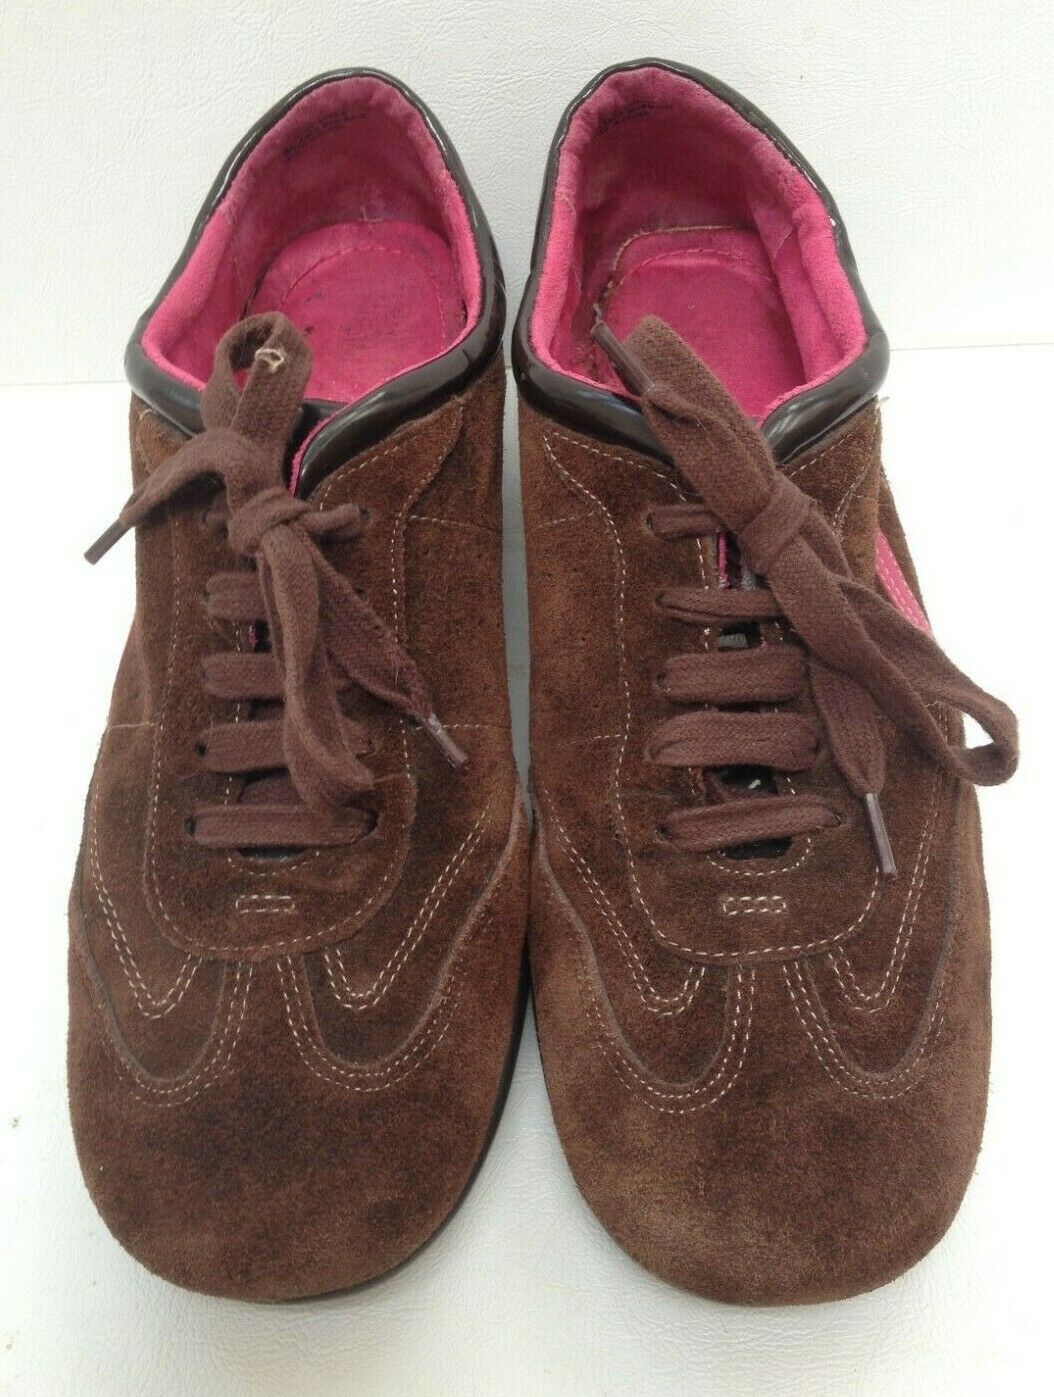 Women's Aerosoles Stitch N Turn Brown Suede Leather Lace Up Flats Shoes - 10.5 M